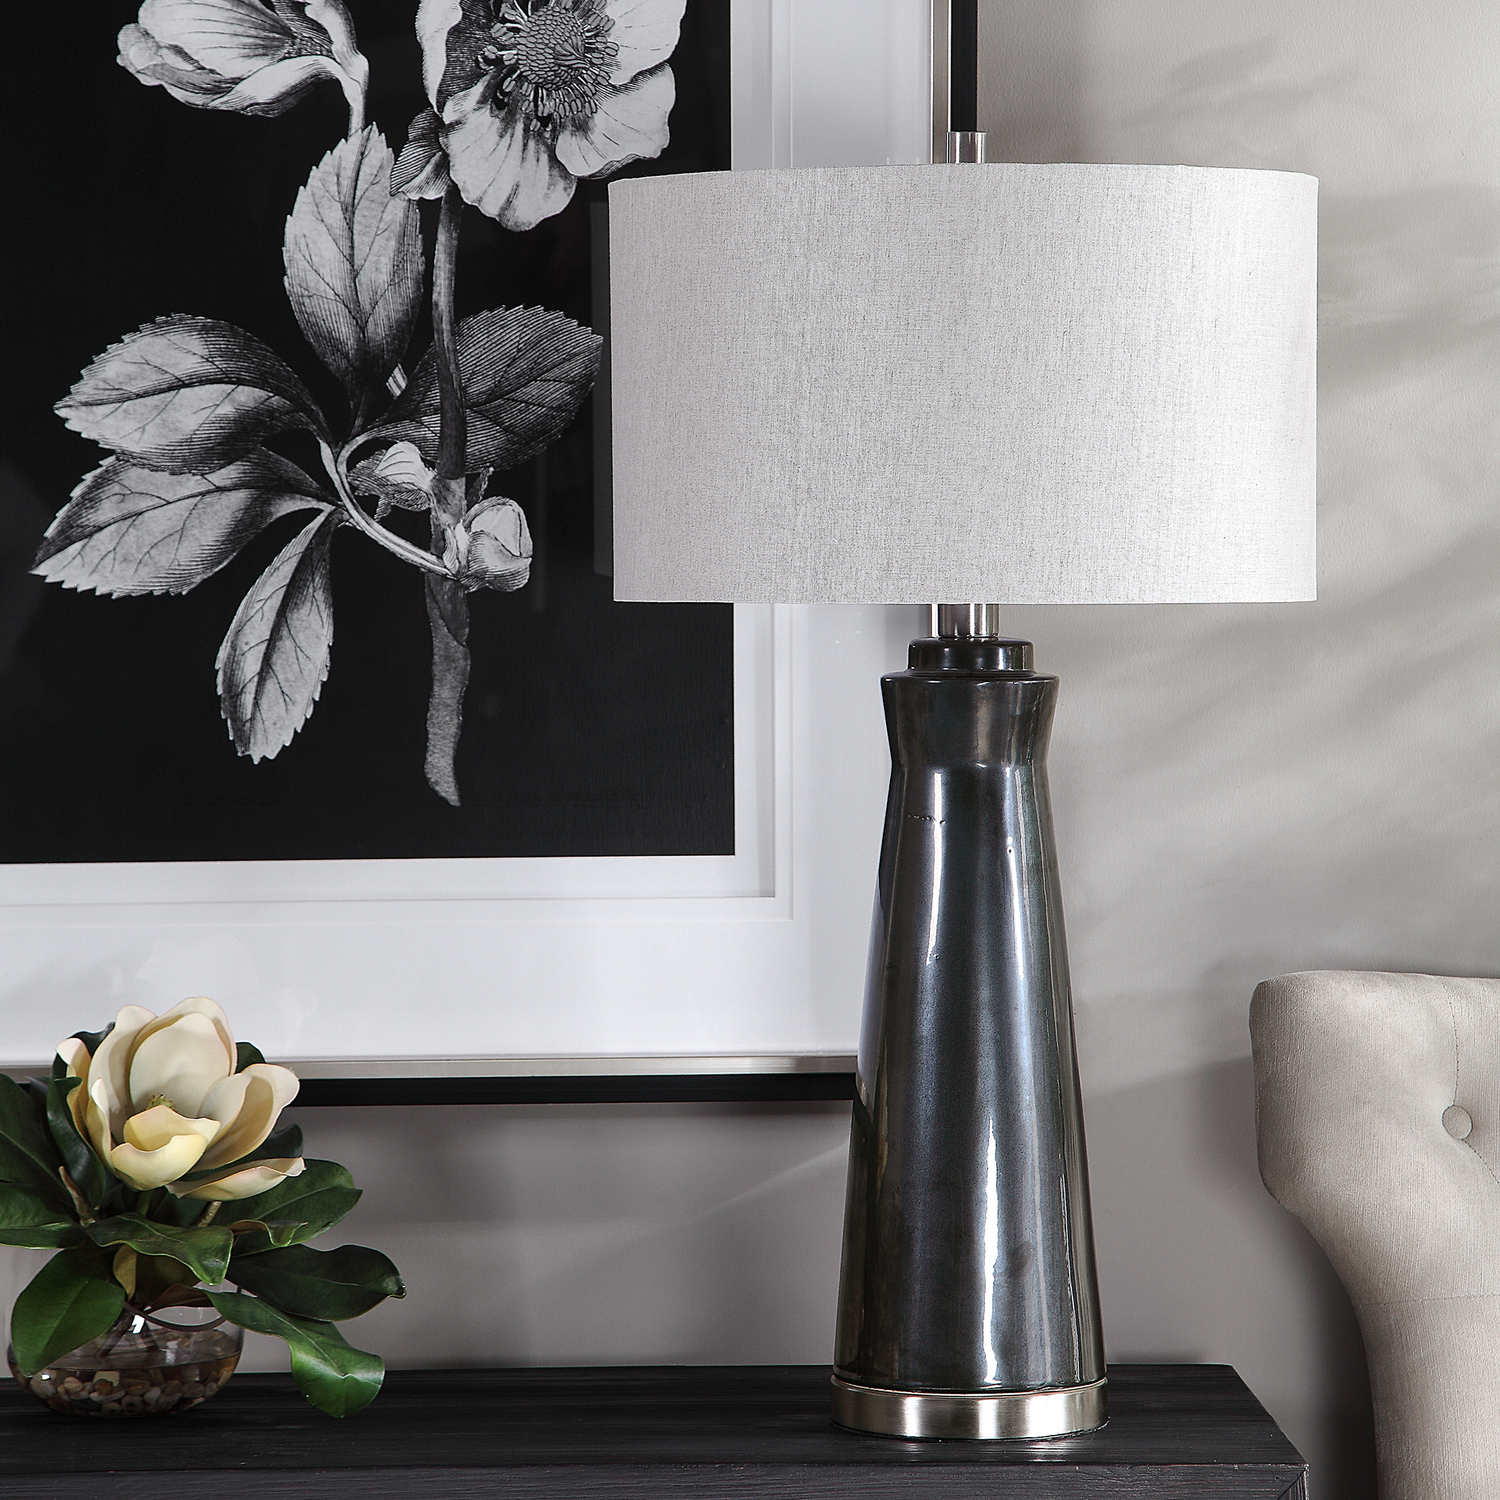 chandelier table lamp gold Uttermost Dark Charcoal Table Lamp Contemporary In Style, This Ceramic Table Lamp Is Finished In A Glossy Dark Charcoal Glaze, Accented With Brushed Nickel Plated Details.